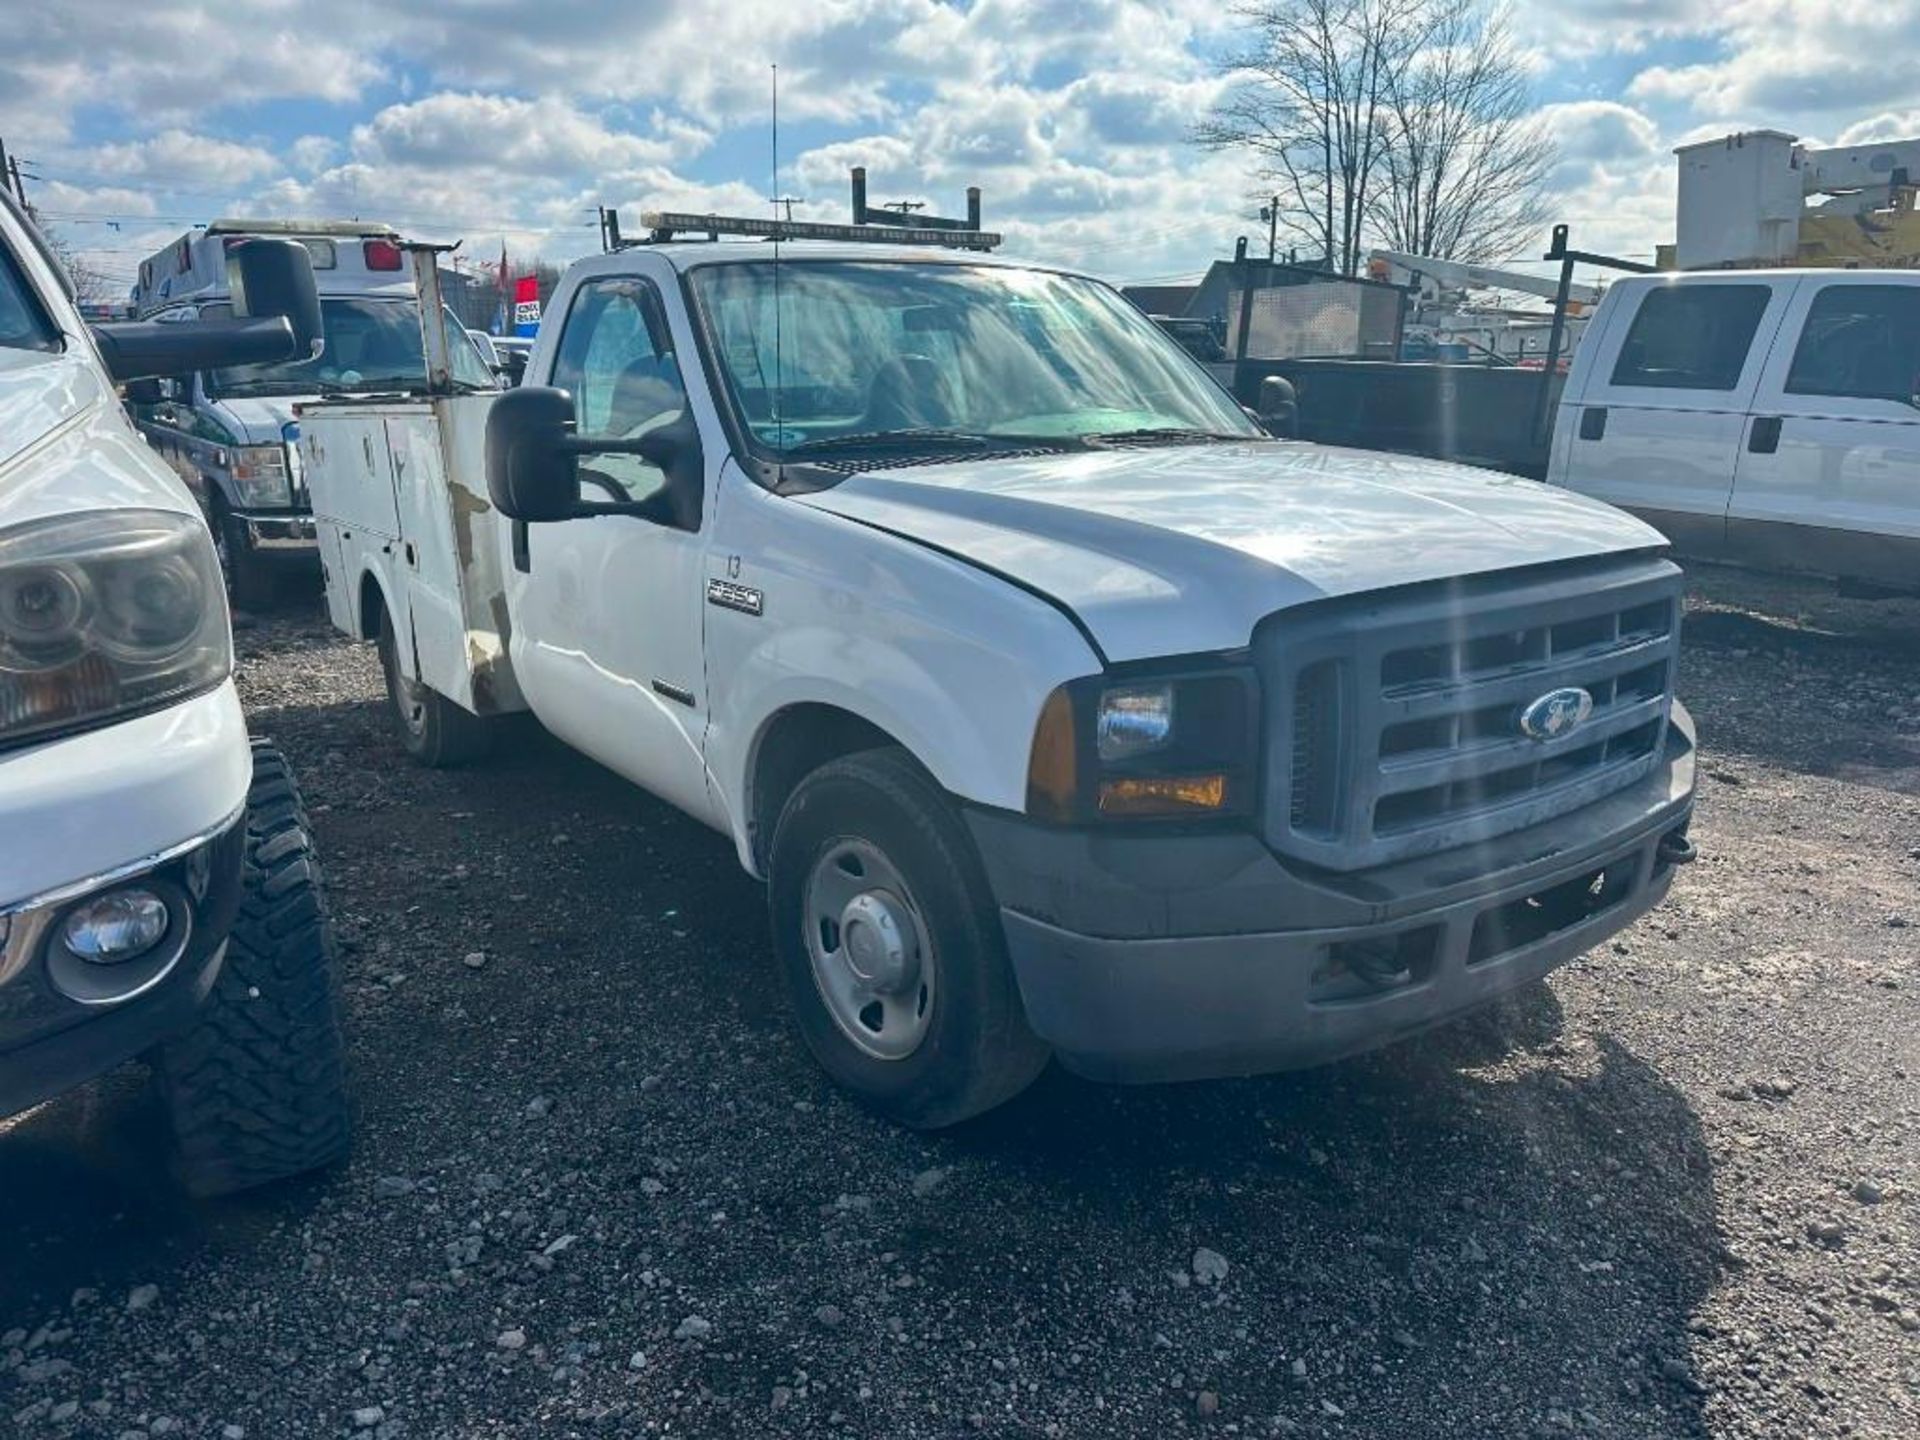 2007 Ford F-250 Pickup Truck (located off-site, please read description) - Image 3 of 11